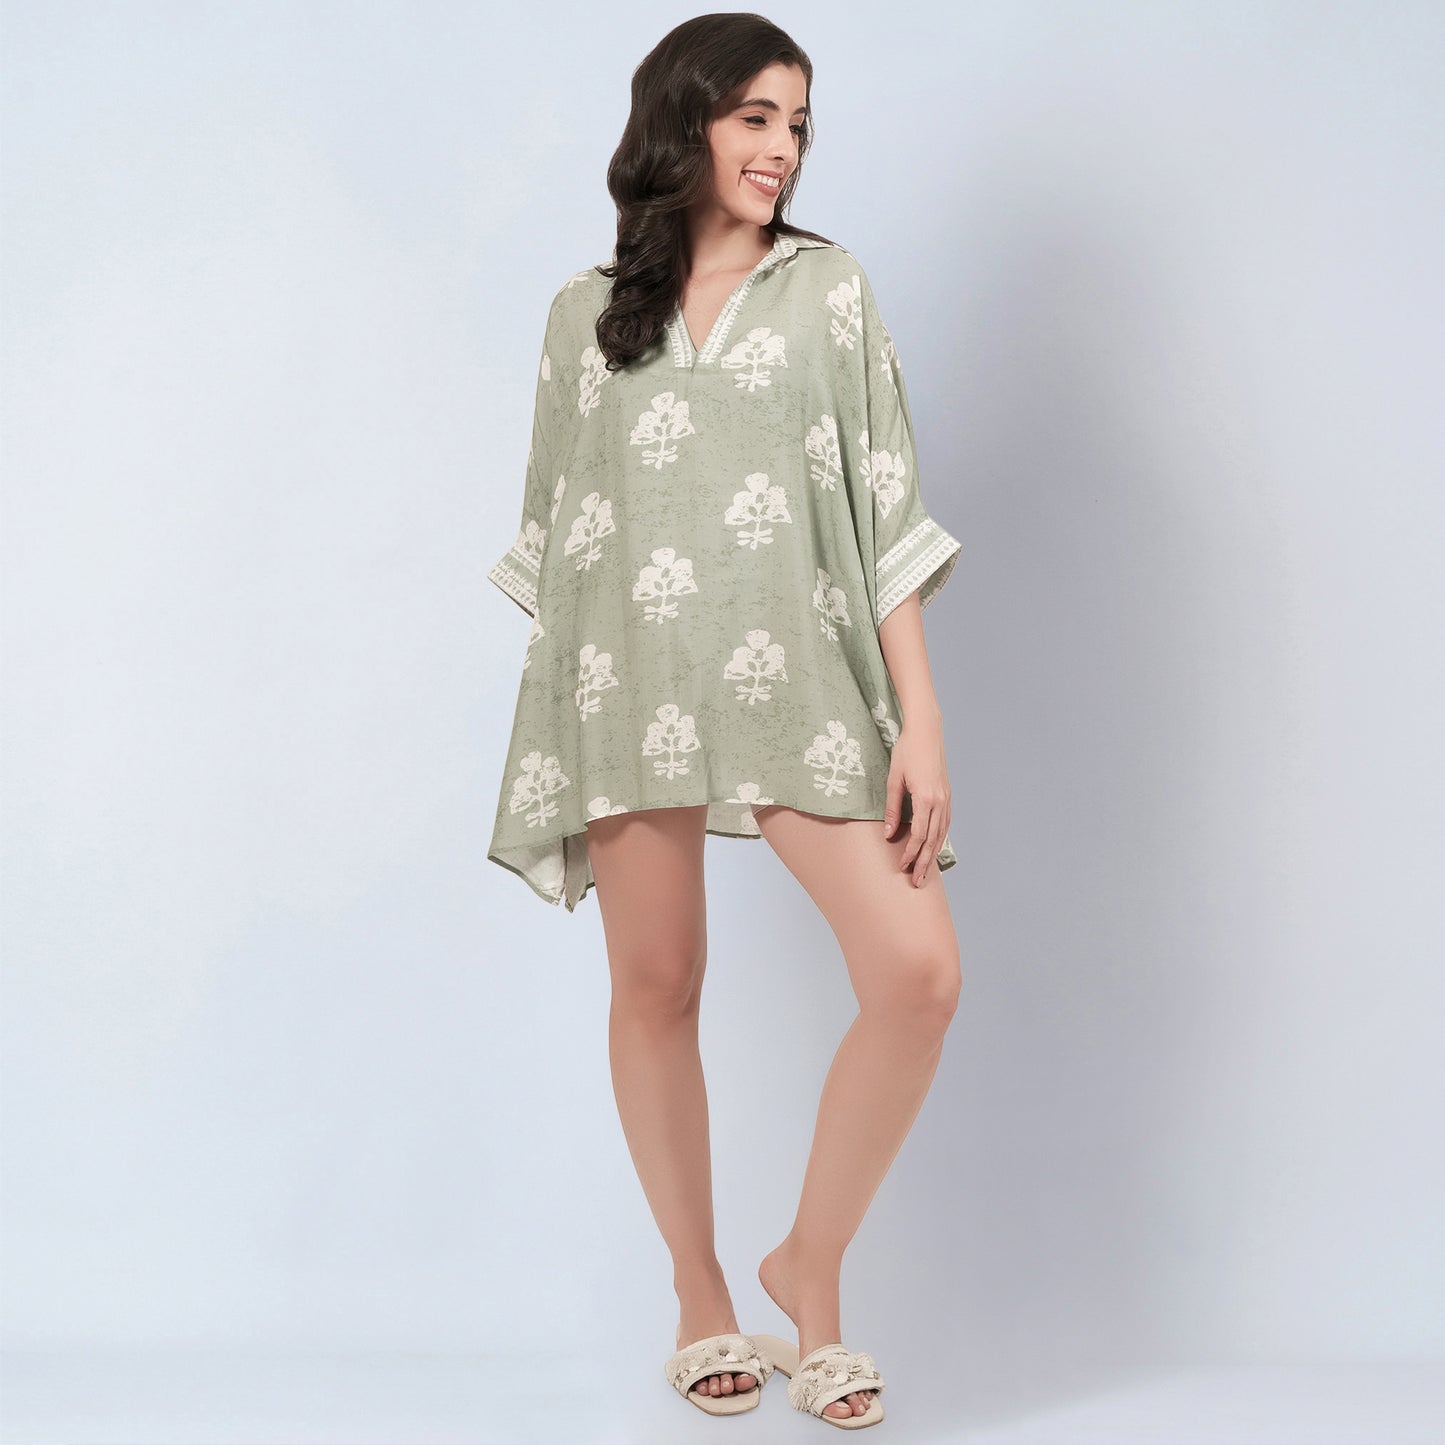 Sage Green and Ecru Floral Short Tunic